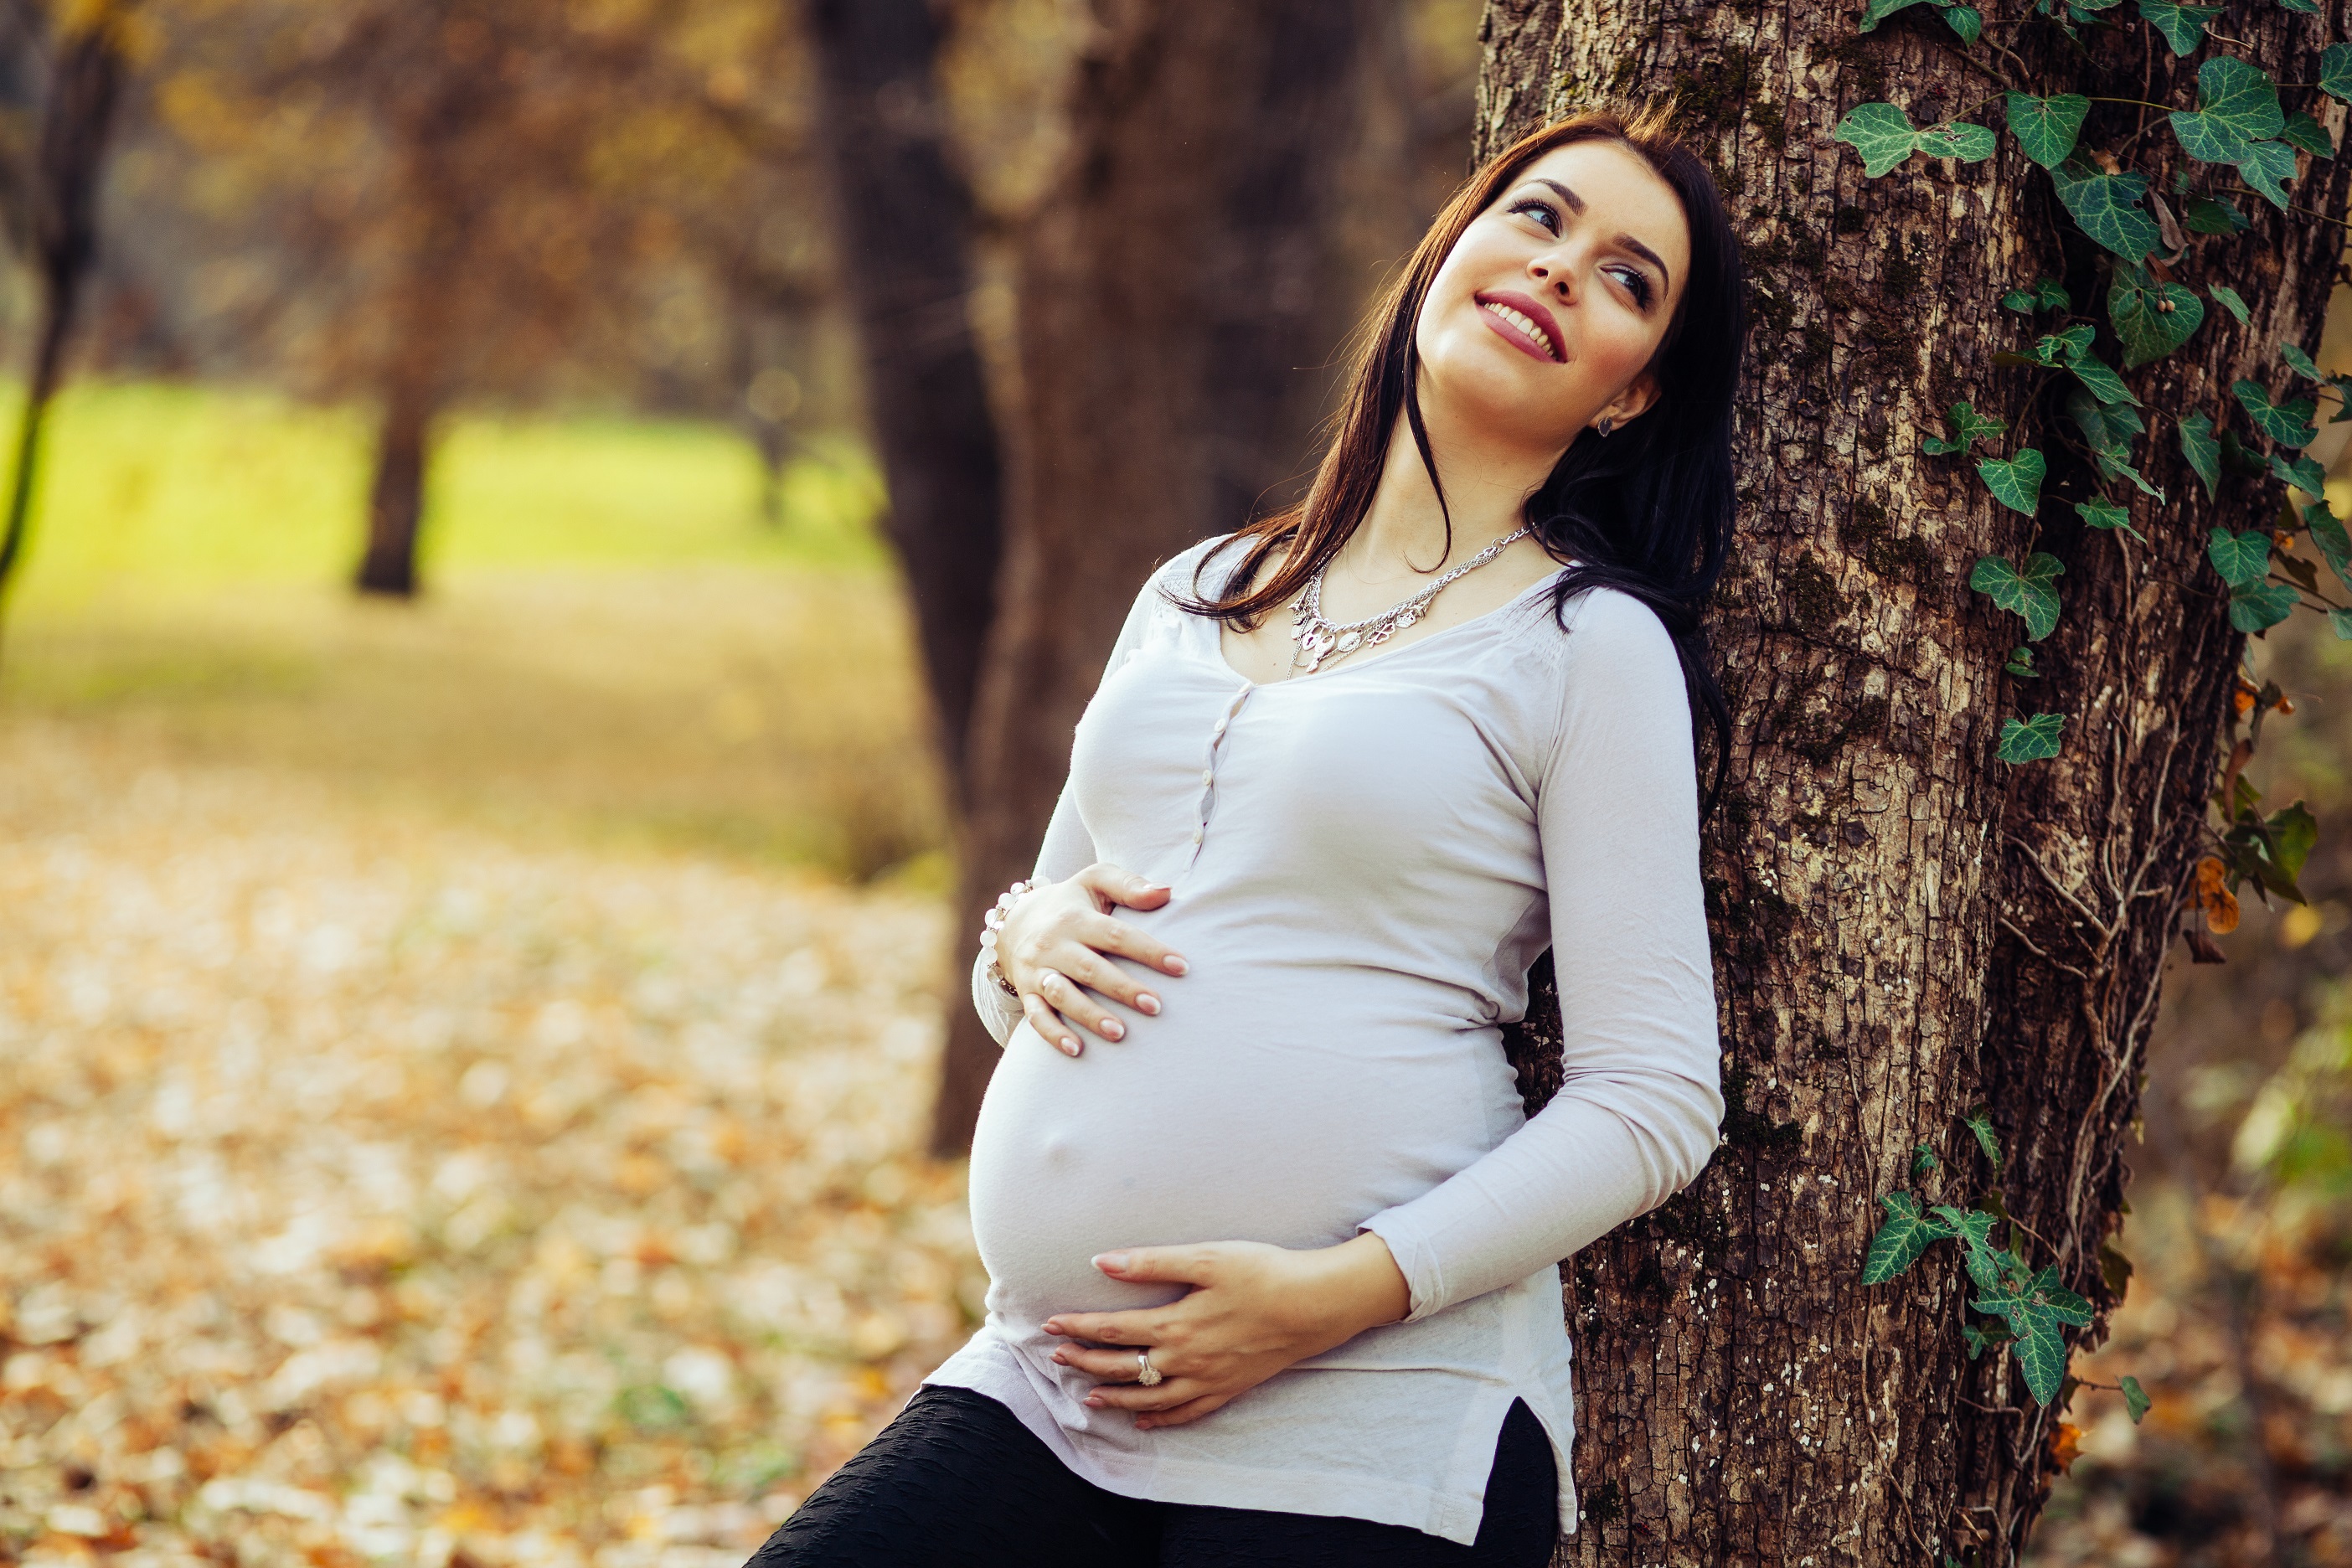 Pregnant woman posing in the park leaning on a tree.